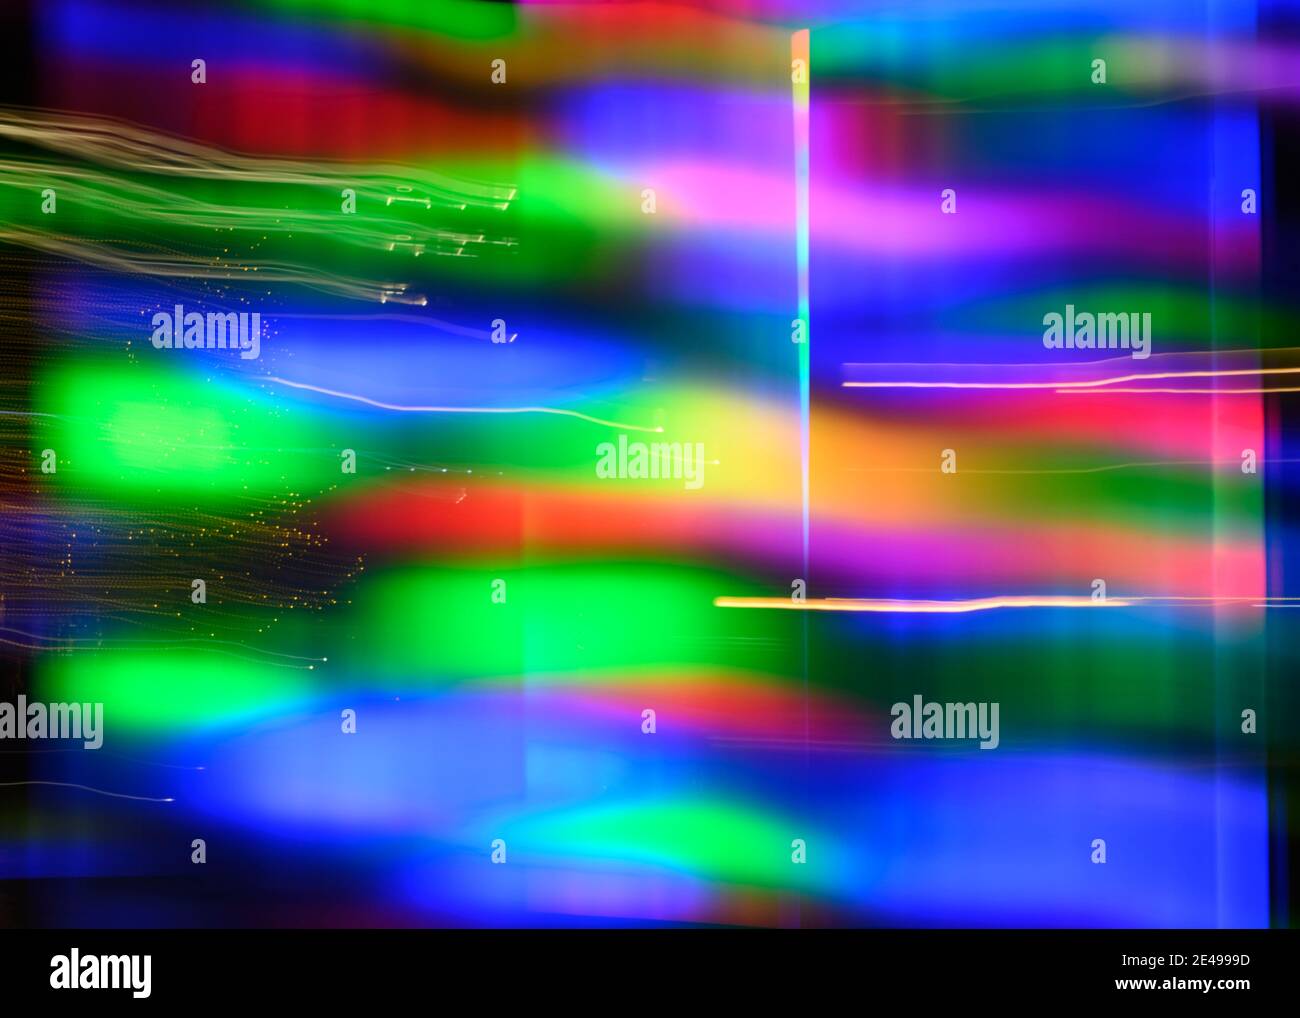 Vivid array of undefined shapes, lines, and squiggles created by LED lights photographed outdoors at night. Stock Photo